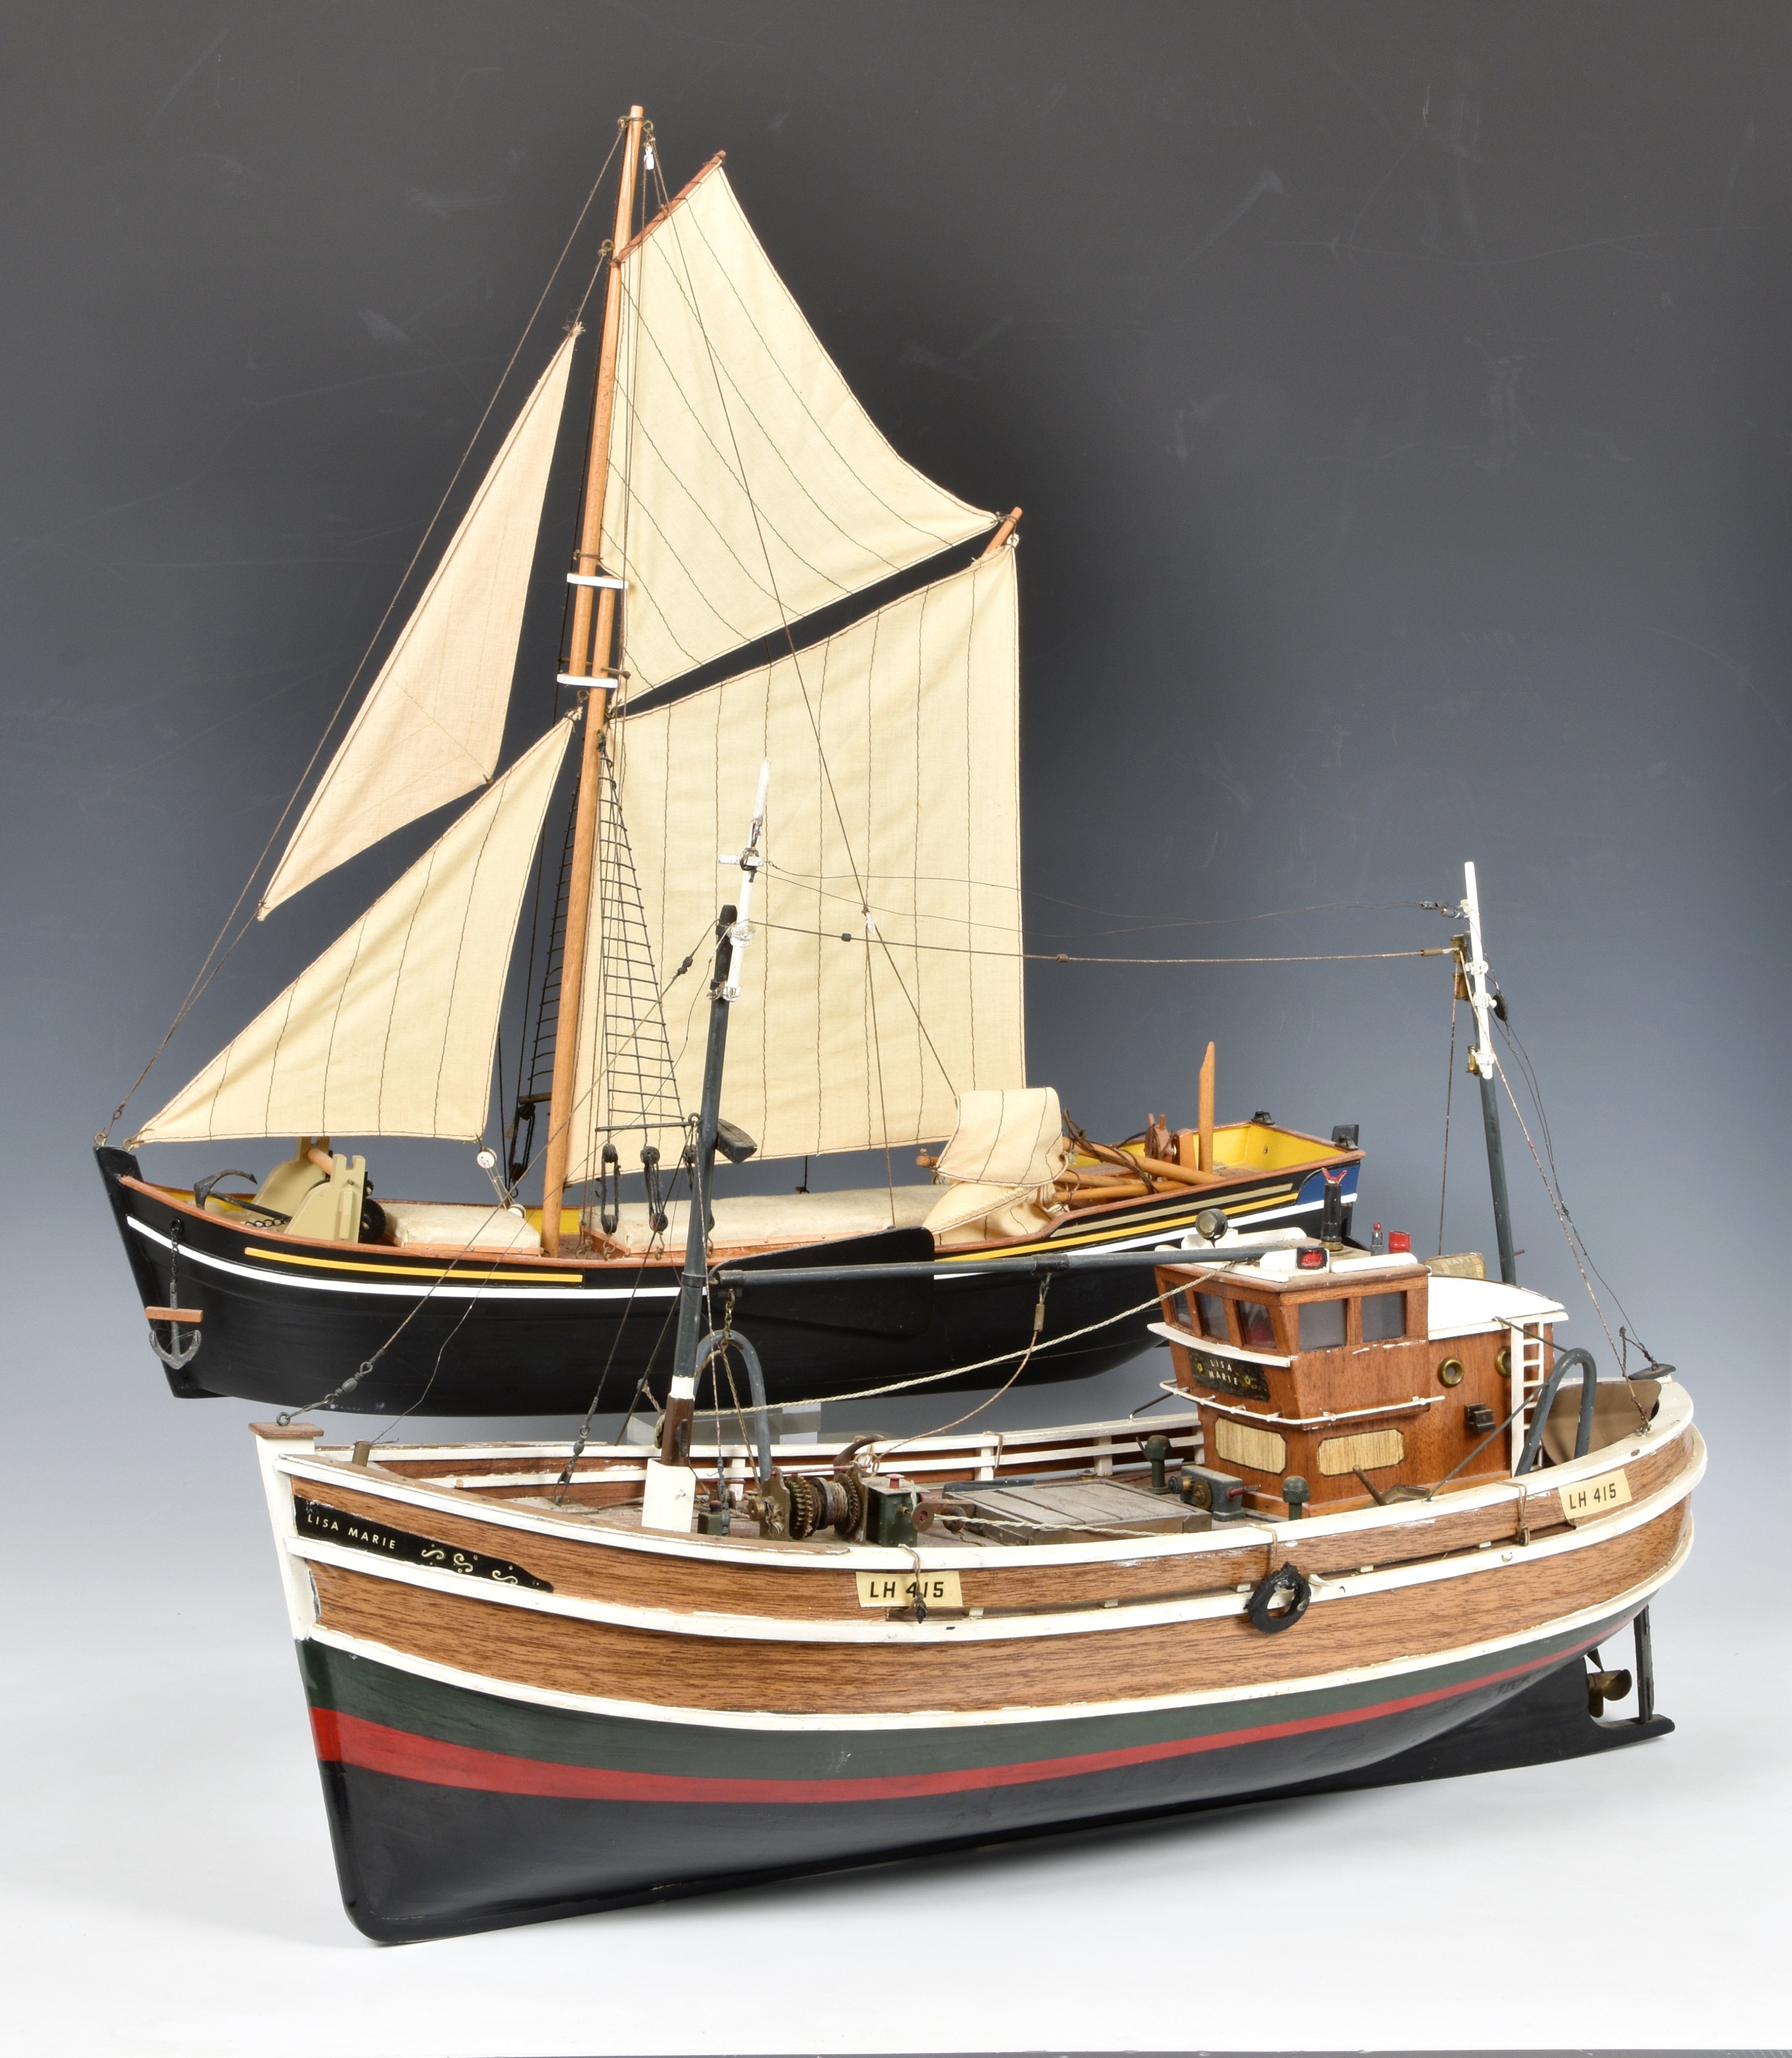 A scratch built model of a Scottish fishing boat 'Lisa Marie', well detailed, wooden built, named '